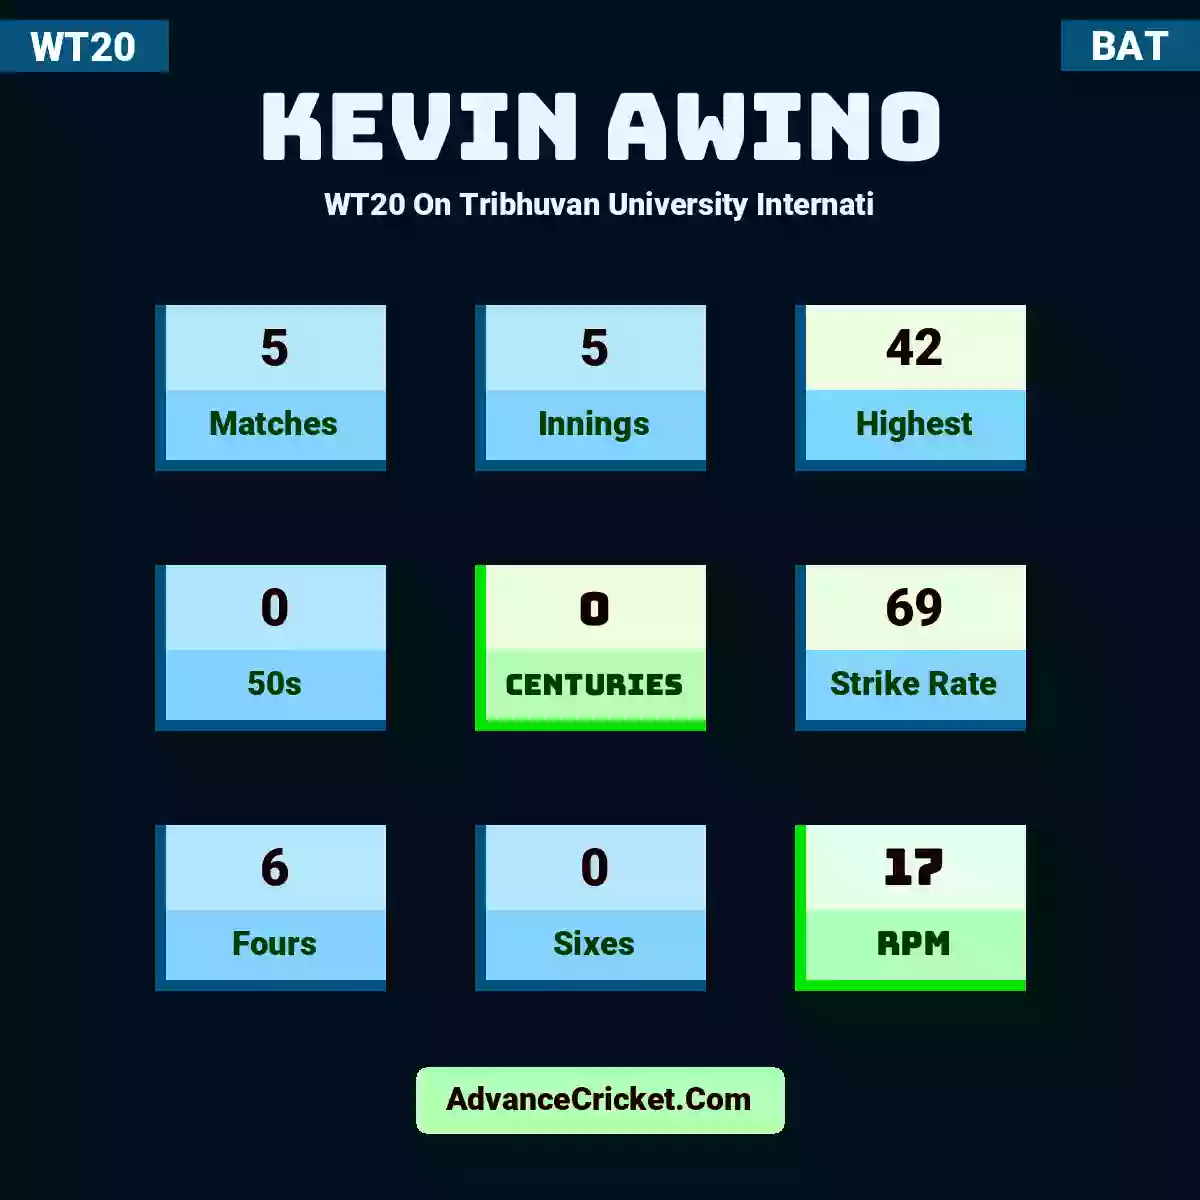 Kevin Awino WT20  On Tribhuvan University Internati, Kevin Awino played 5 matches, scored 42 runs as highest, 0 half-centuries, and 0 centuries, with a strike rate of 69. K.Awino hit 6 fours and 0 sixes, with an RPM of 17.